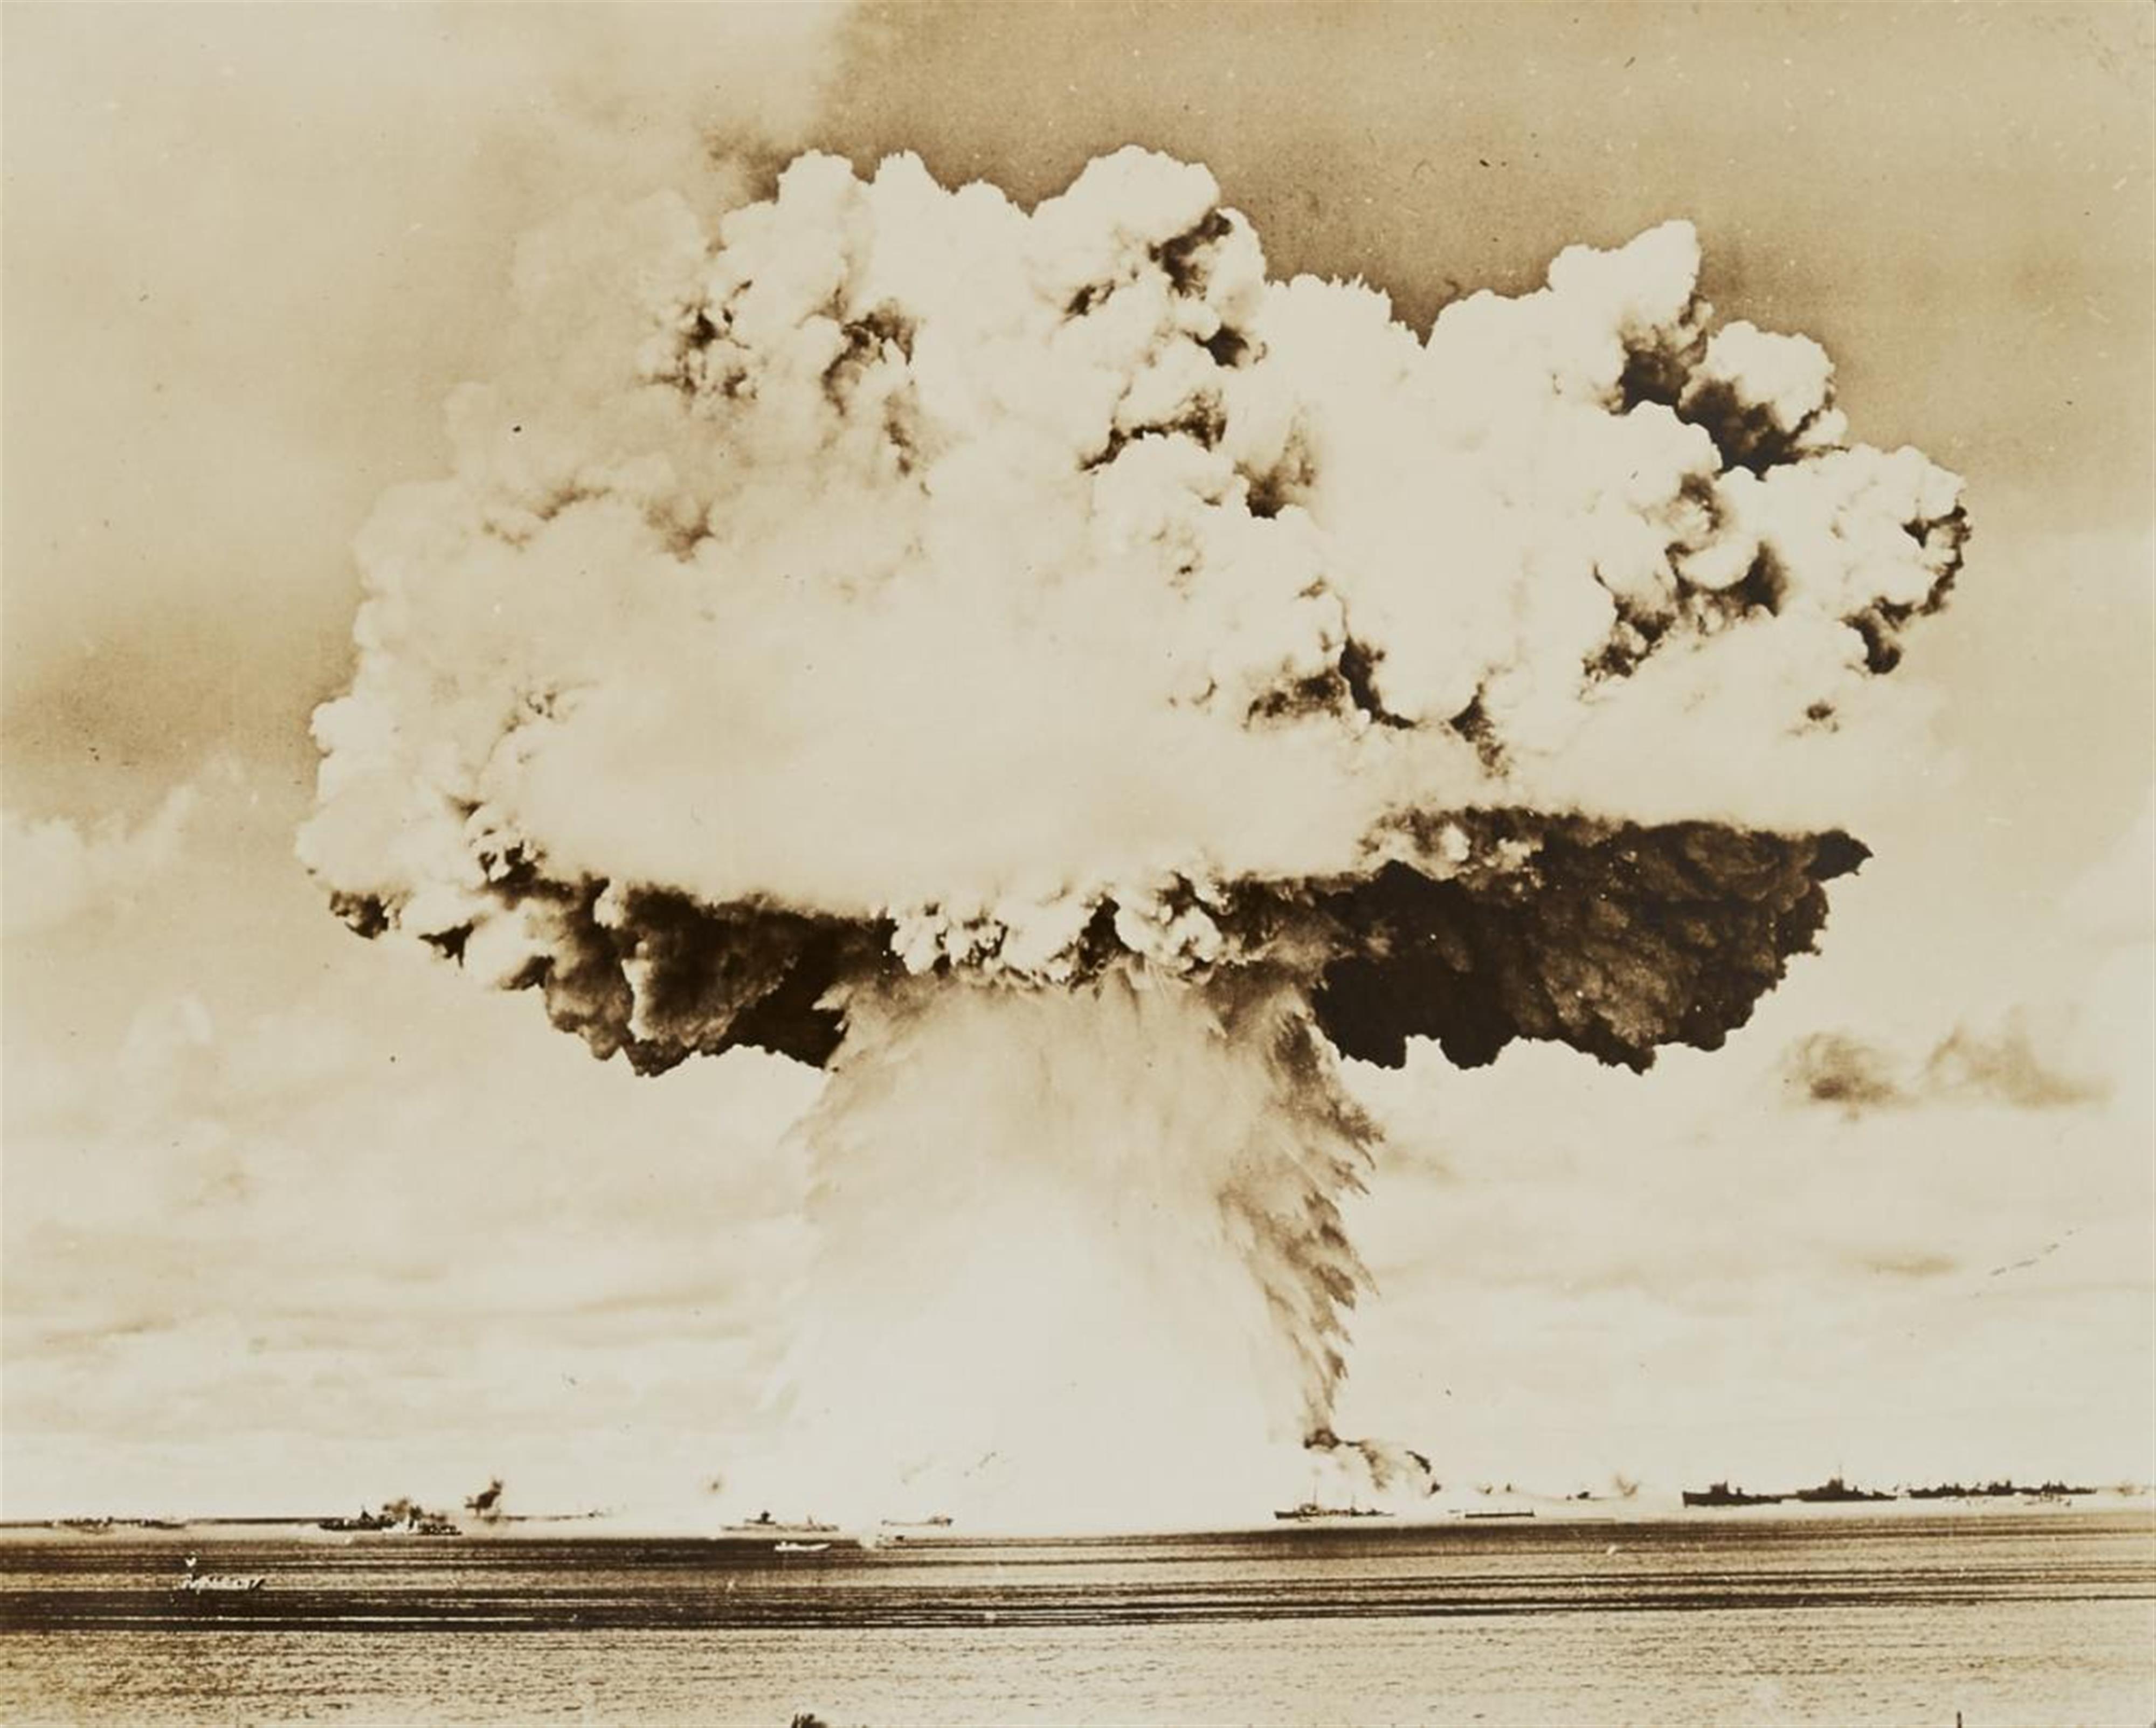 Official Photograph U.S. Navy - "Able" Atomic Bomb Test. "Able" Atomic Bomb Test. "Baker" Atomic Bomb Test. - image-3